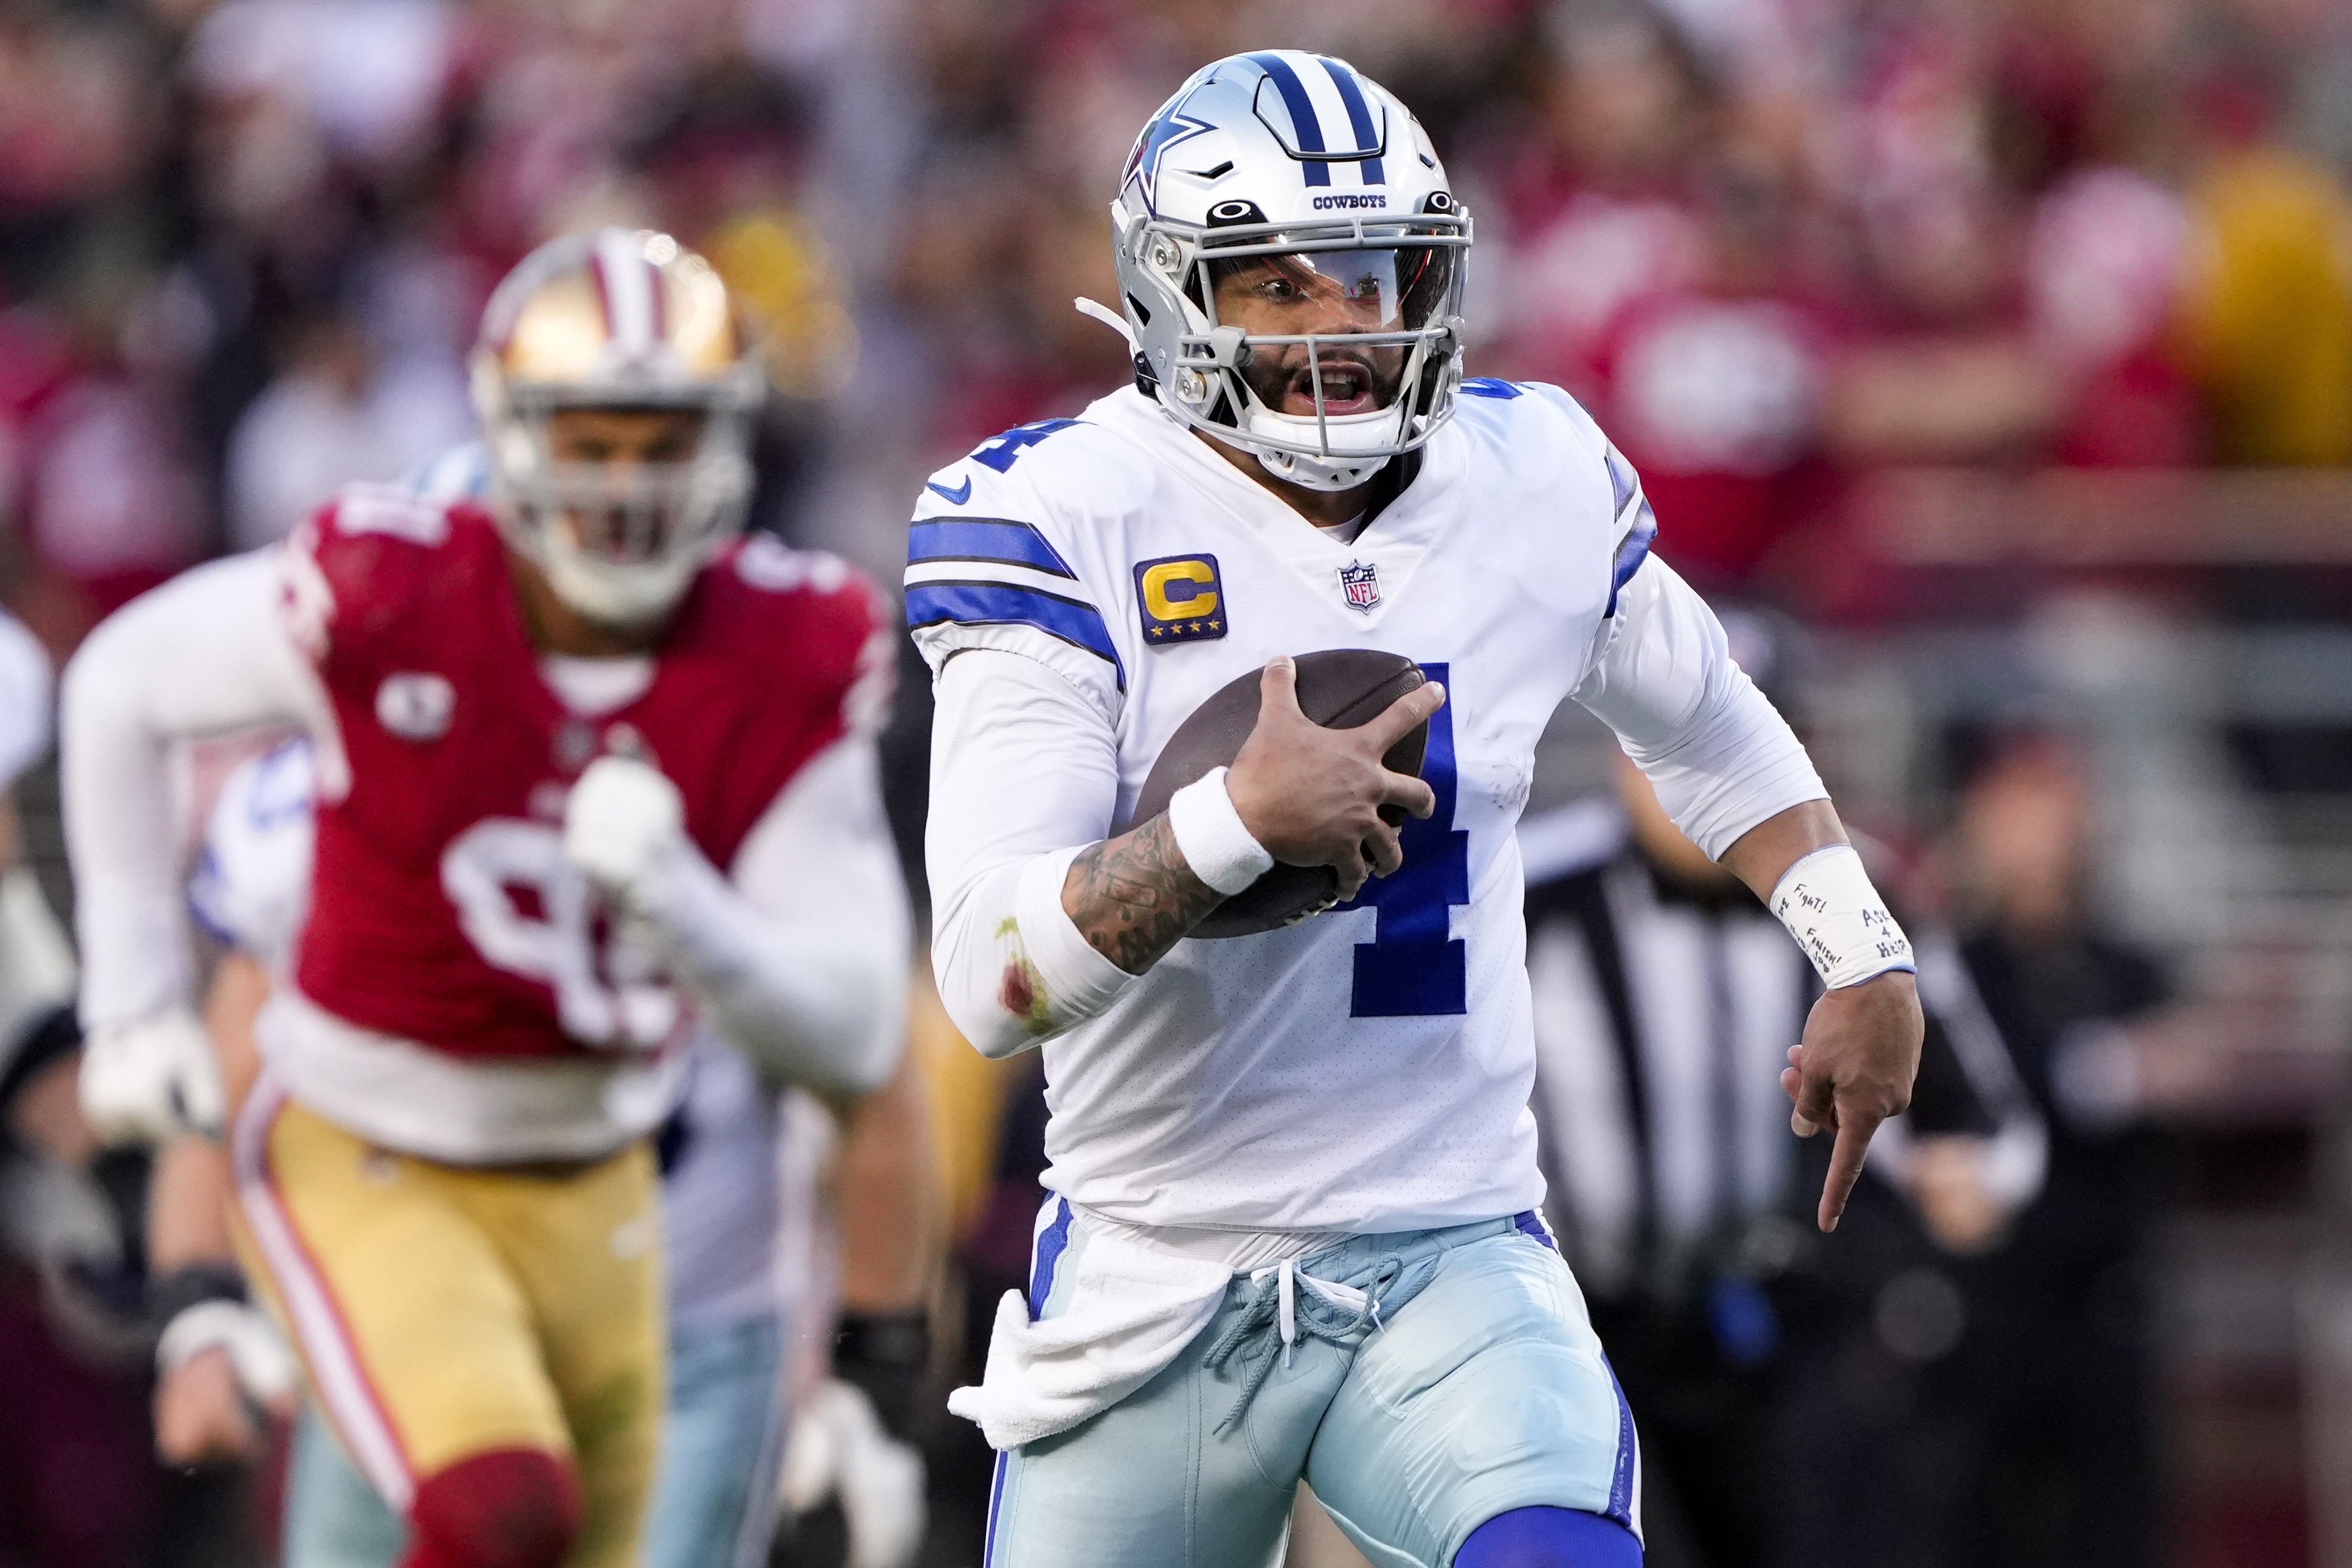 Cowboys-49ers wildcard game renews a great rivalry